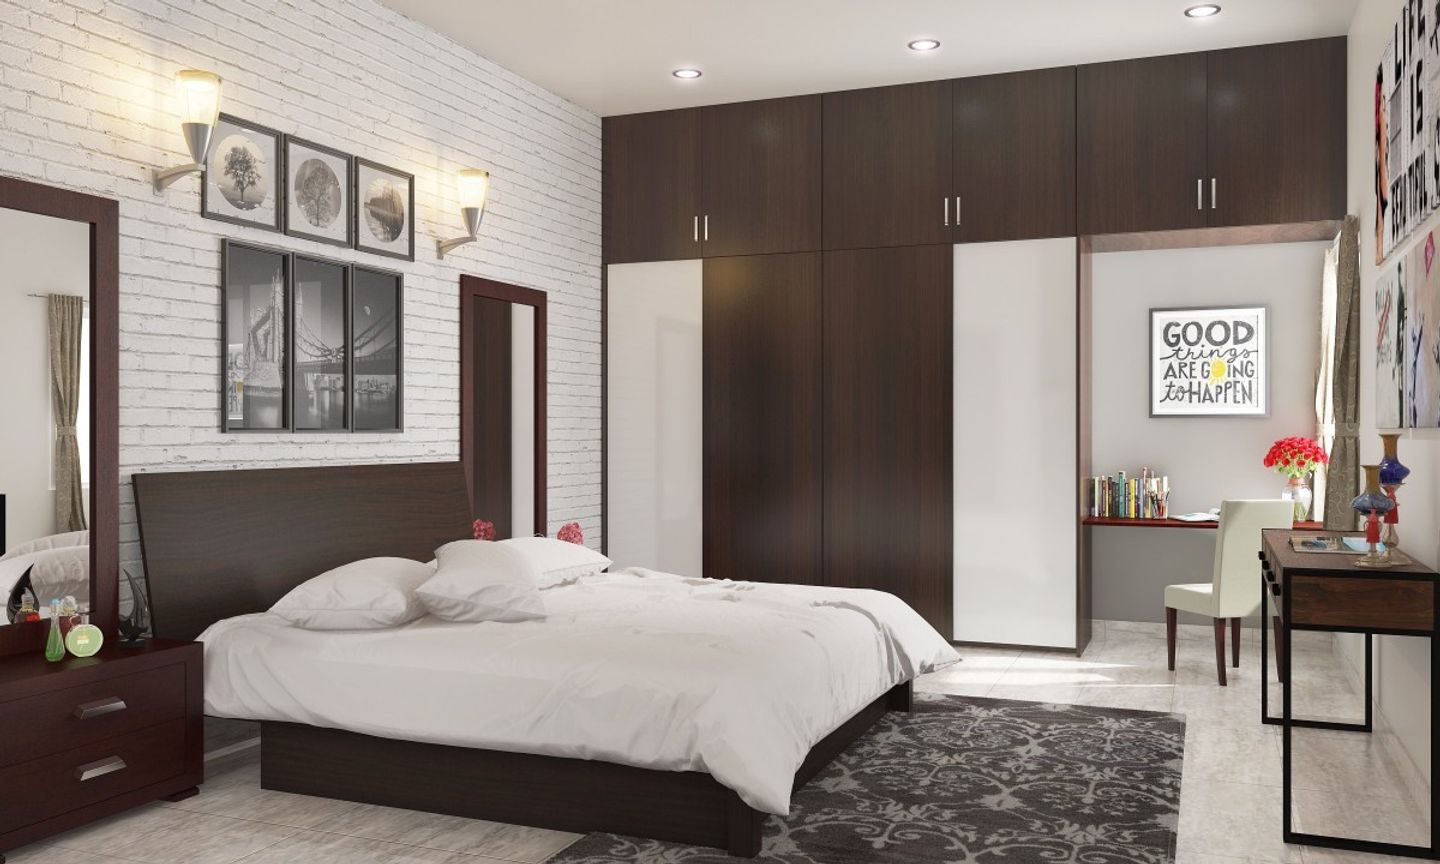 Contemporary White And Brown Bedroom Design With Wallpaper